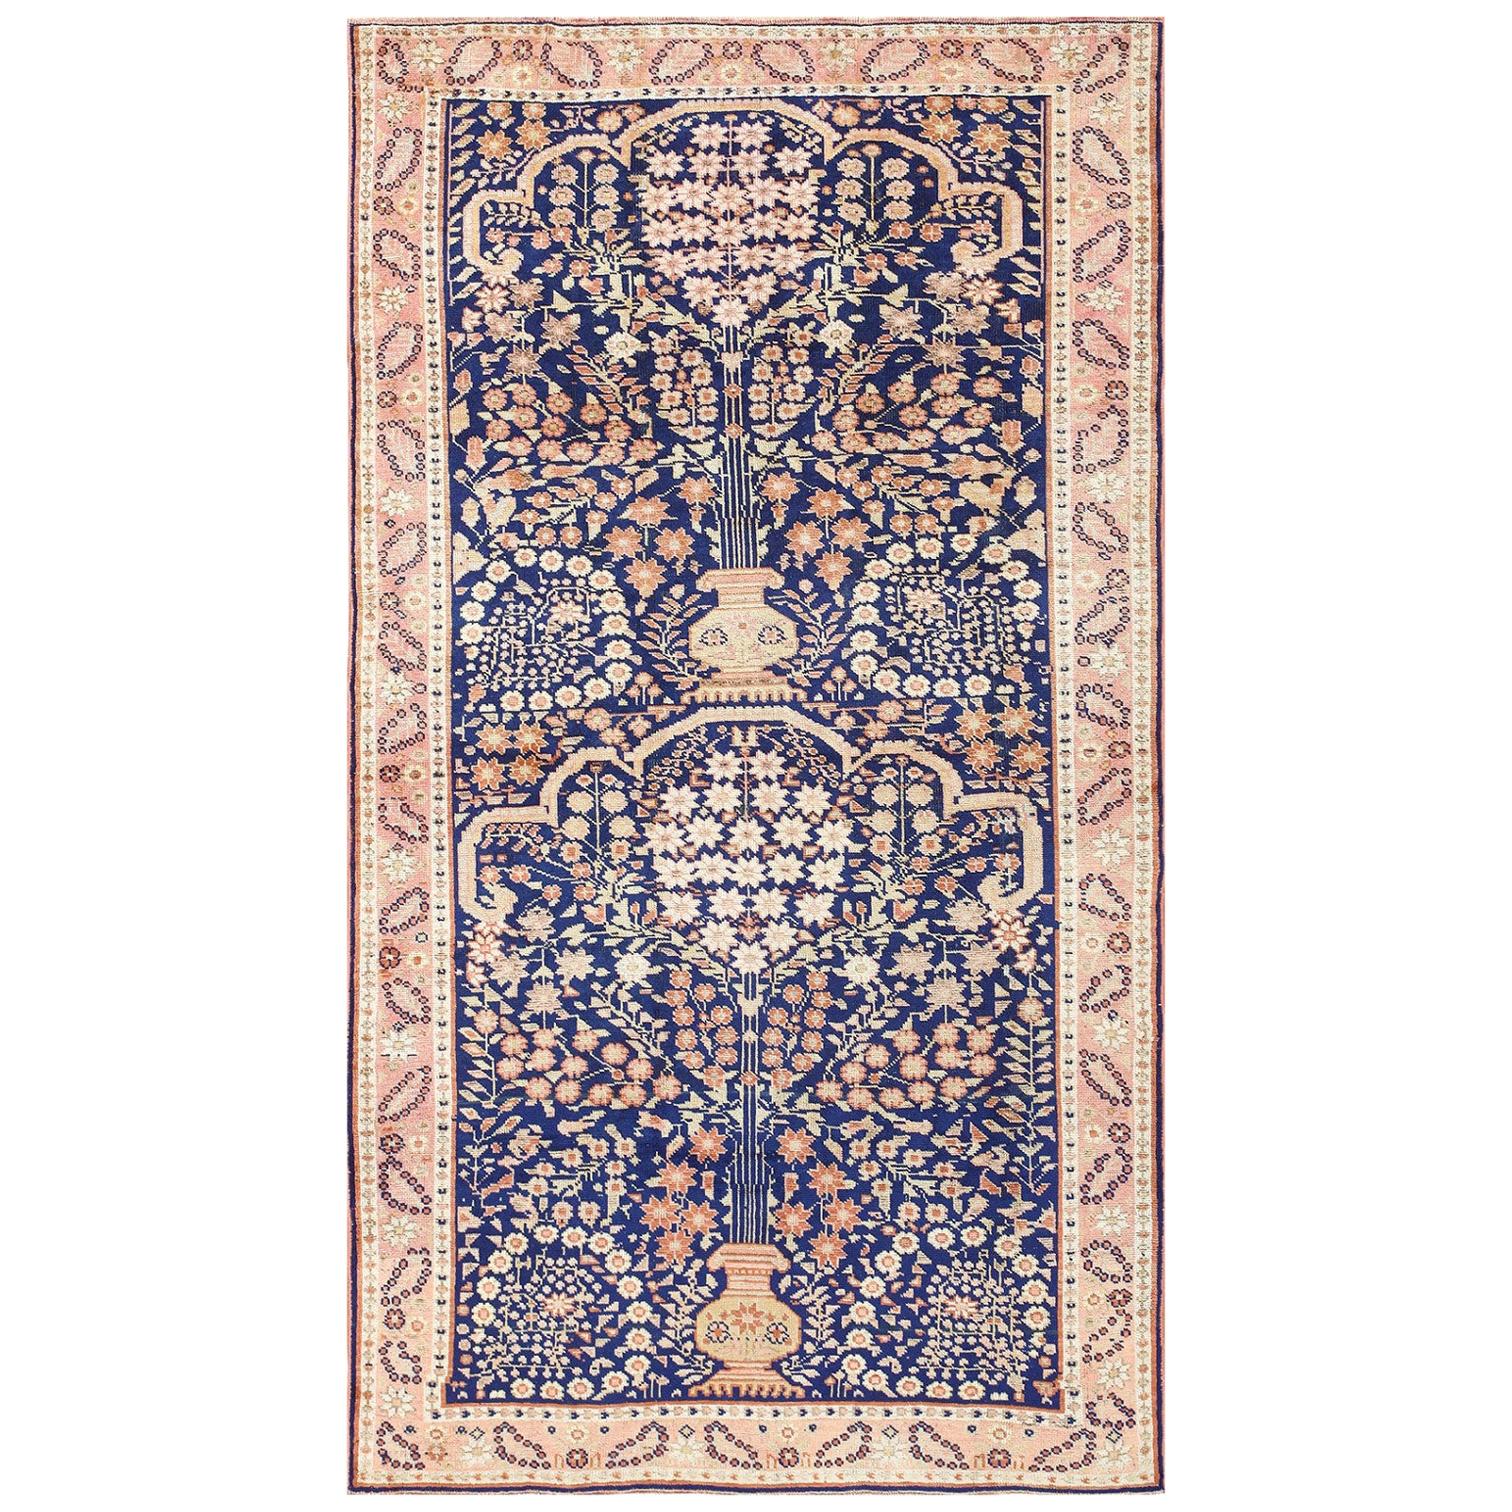 Antique Persian Afshar Rug. Size: 4 ft x 7 ft 4 in (1.22 m x 2.24 m)